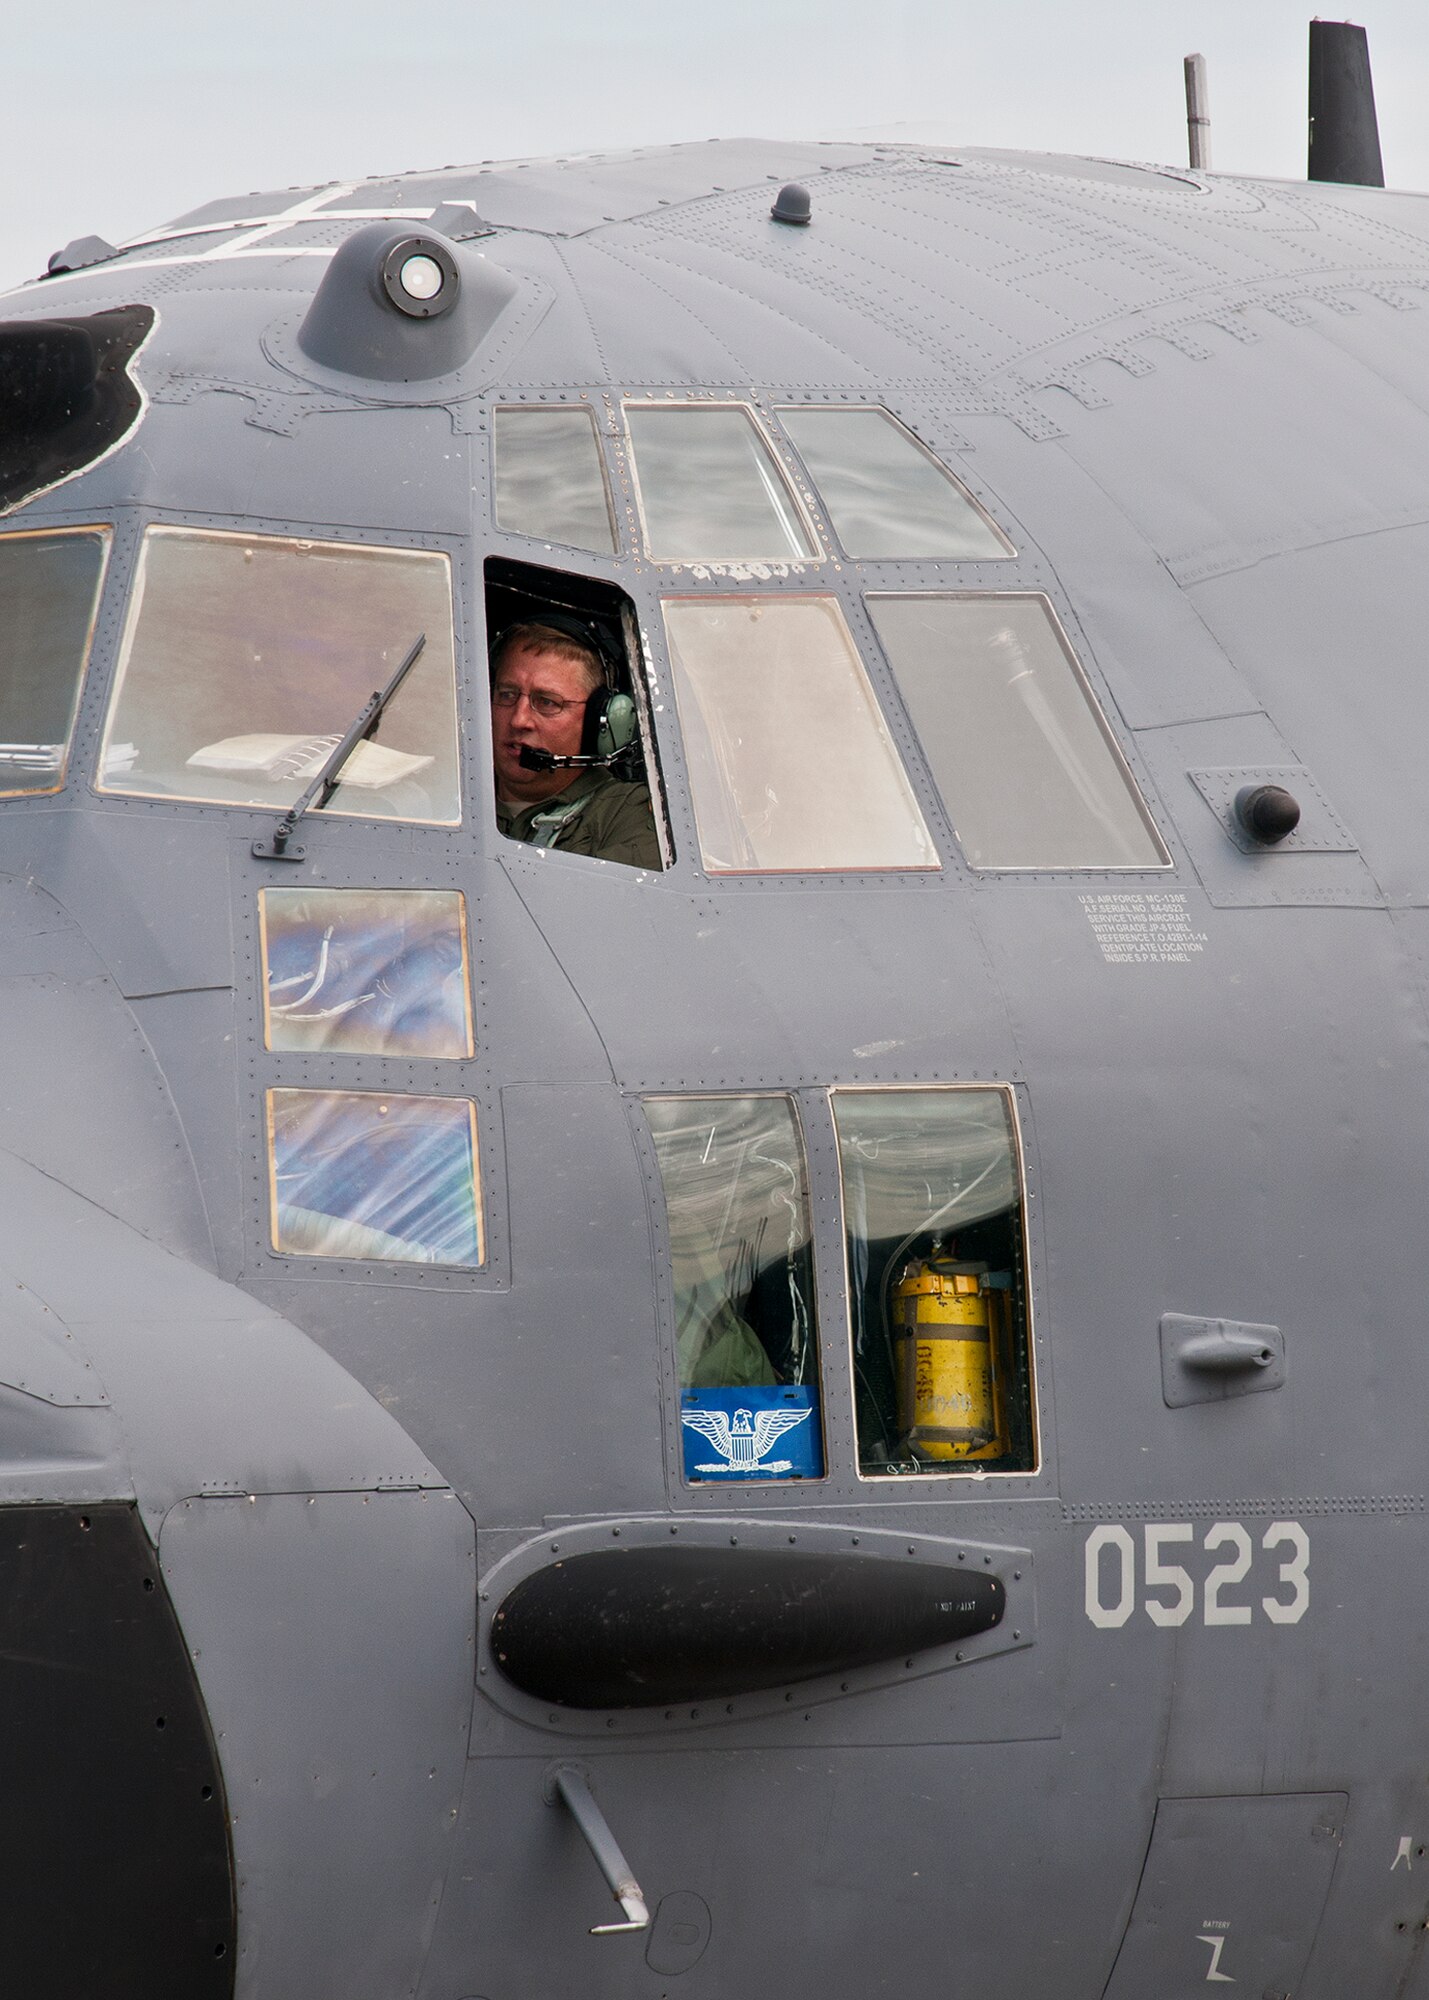 Lt. Col. Tom Miller, of the 919th Special Operations Wing, executes his preflight checks before piloting the MC-130E Combat Talon I, 64-0523 “Godfather” on its final flight June 22 at Duke Field, Fla.  The final flight landed at Cannon Air Force Base, N.M., where 0523 is scheduled to be a static display at the base’s airpark.  The aircraft has the distinction of leading the Air Force’s assault force during the Son Tay Raid to rescue prisoners of war in Vietnam in 1970.  (U.S. Air Force photo/Tech. Sgt. Samuel King Jr.)